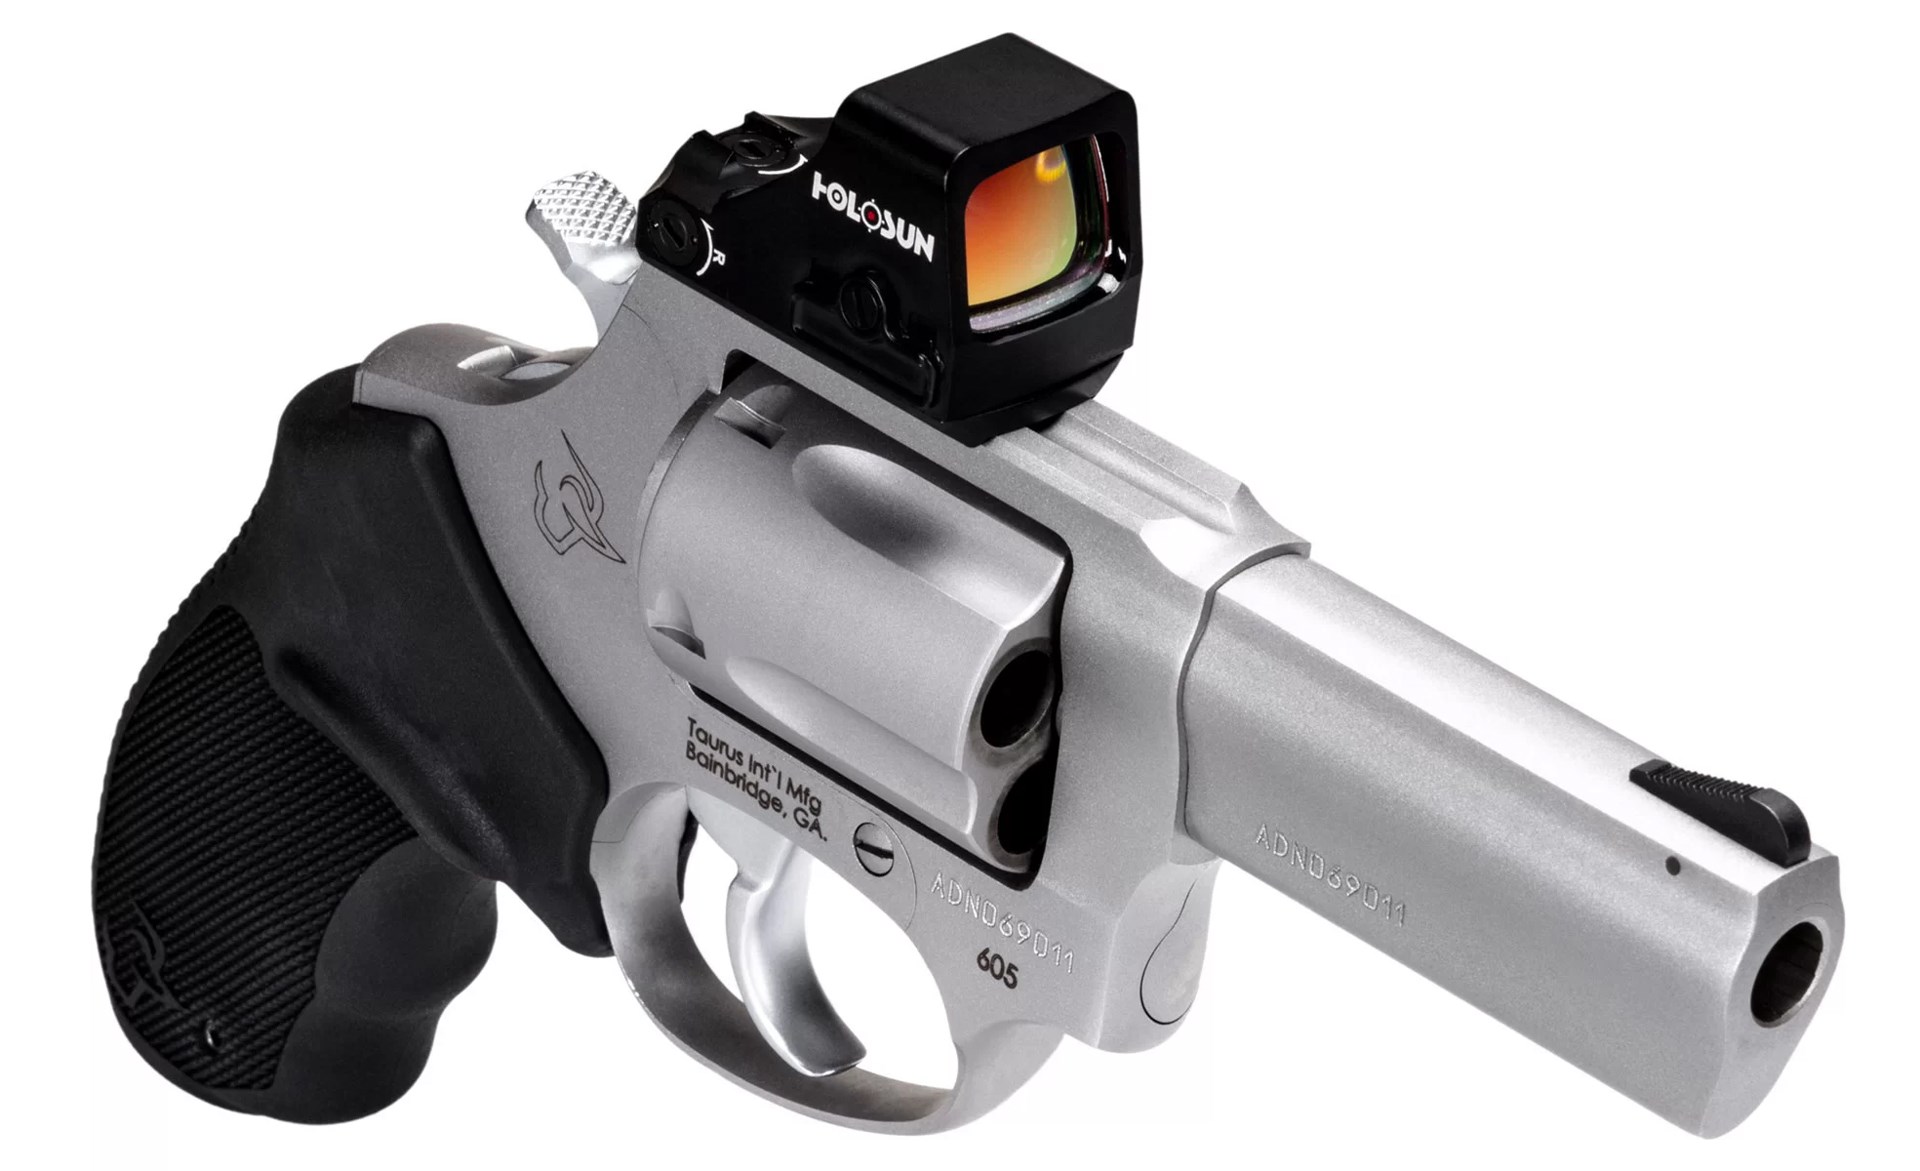 Taurus 605 T.O.R.O. double-action revolver stainless steel black rubber stock and Holosun optic attached for sighting white background